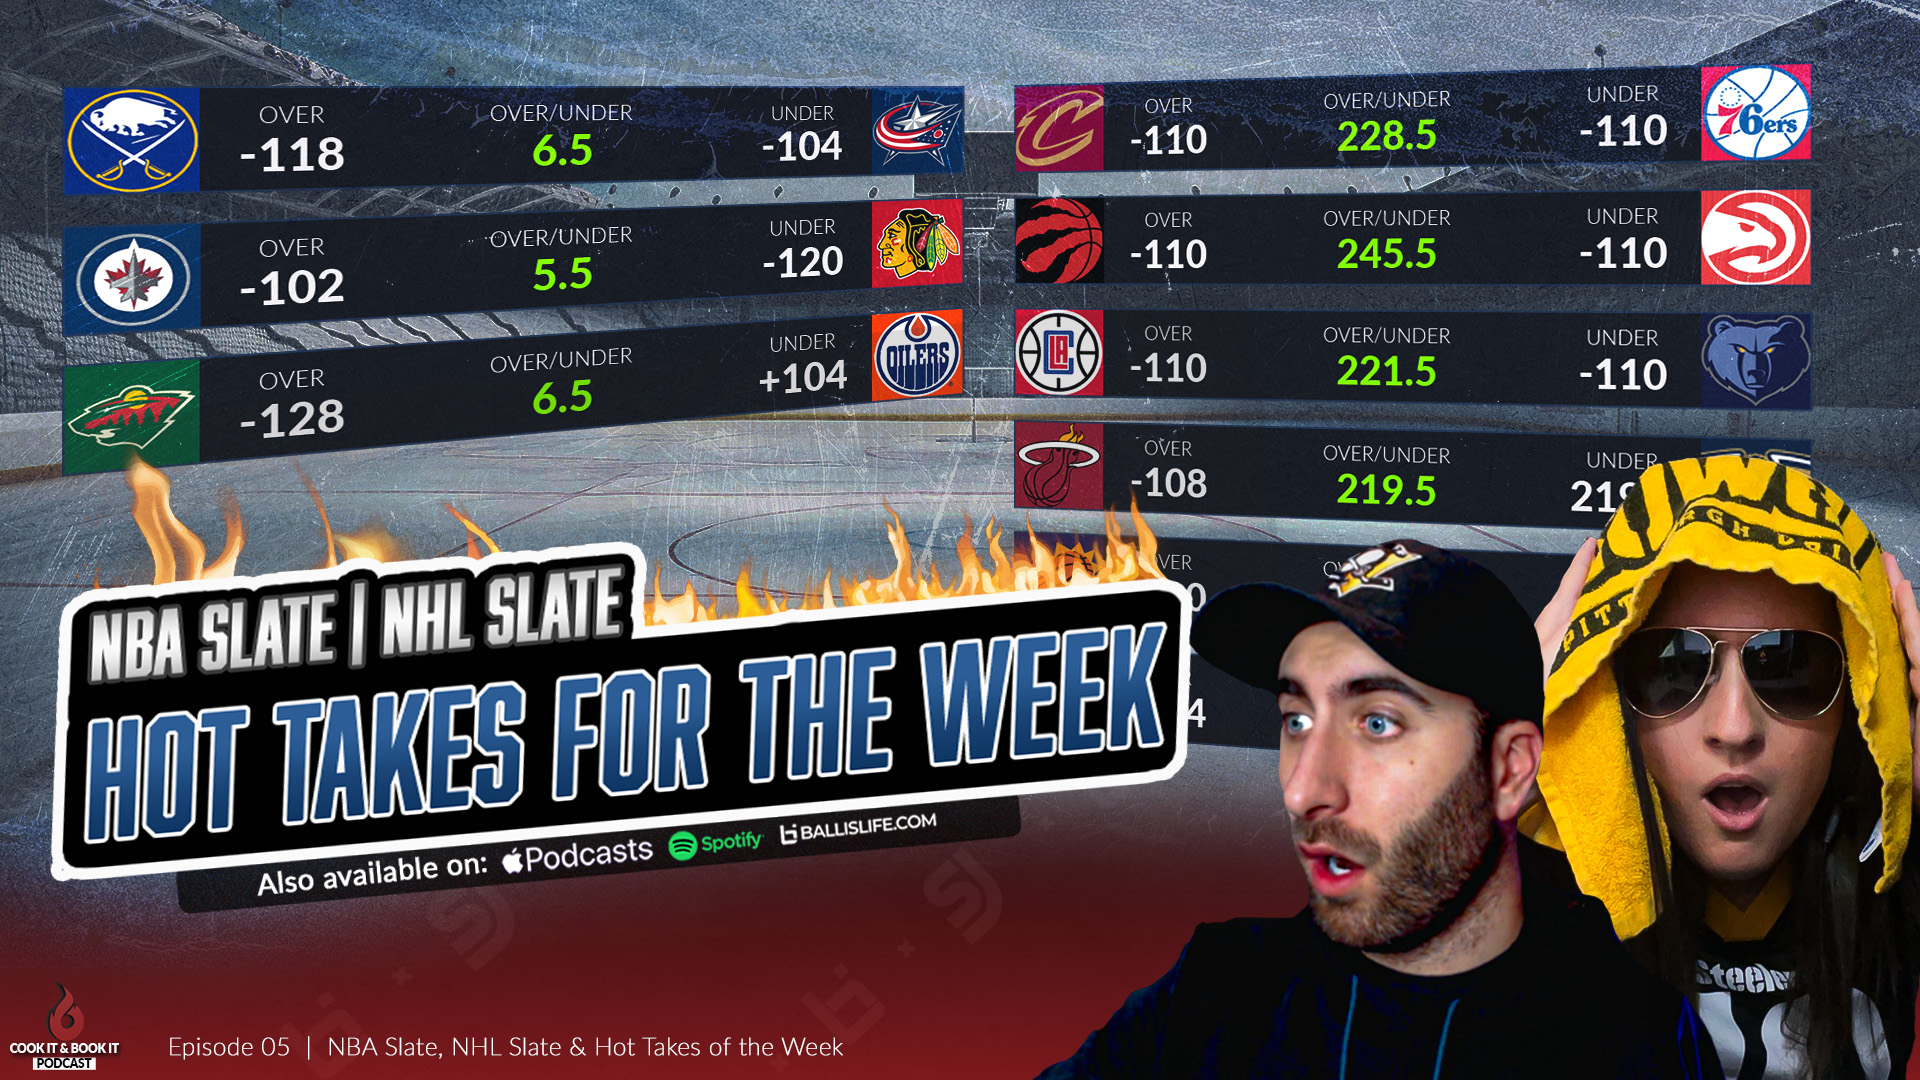 Episode 5: NBA and NHL best bets and parlays for the weekend